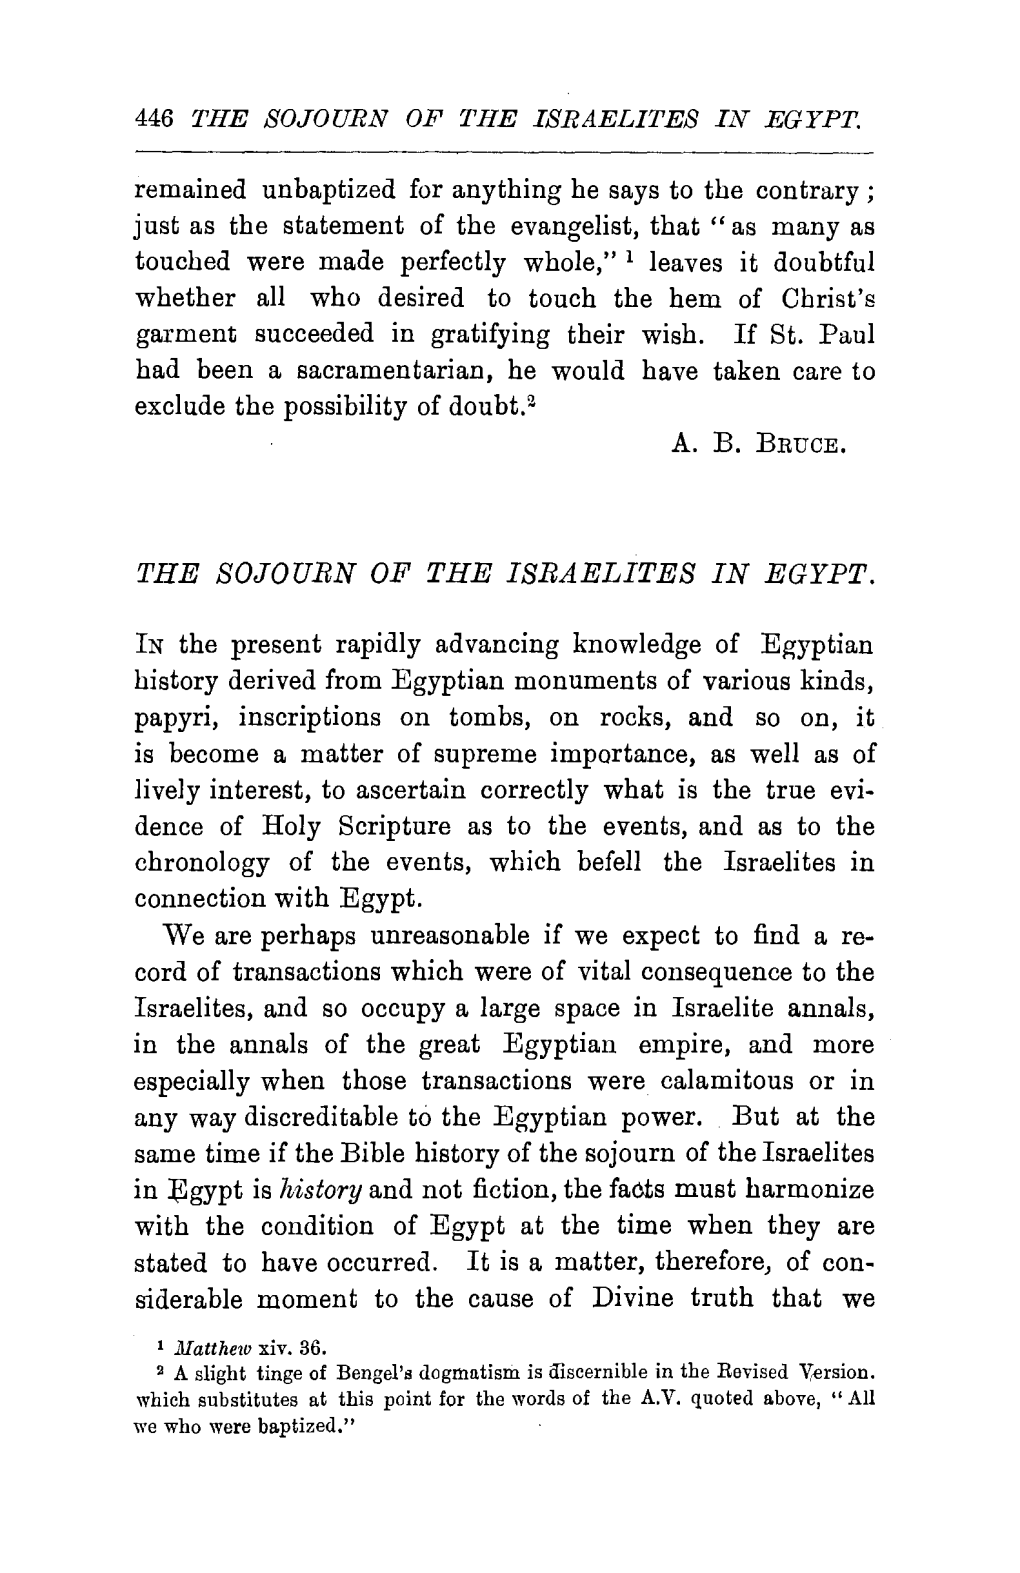 The Sojourn of the Israelites in Egypt